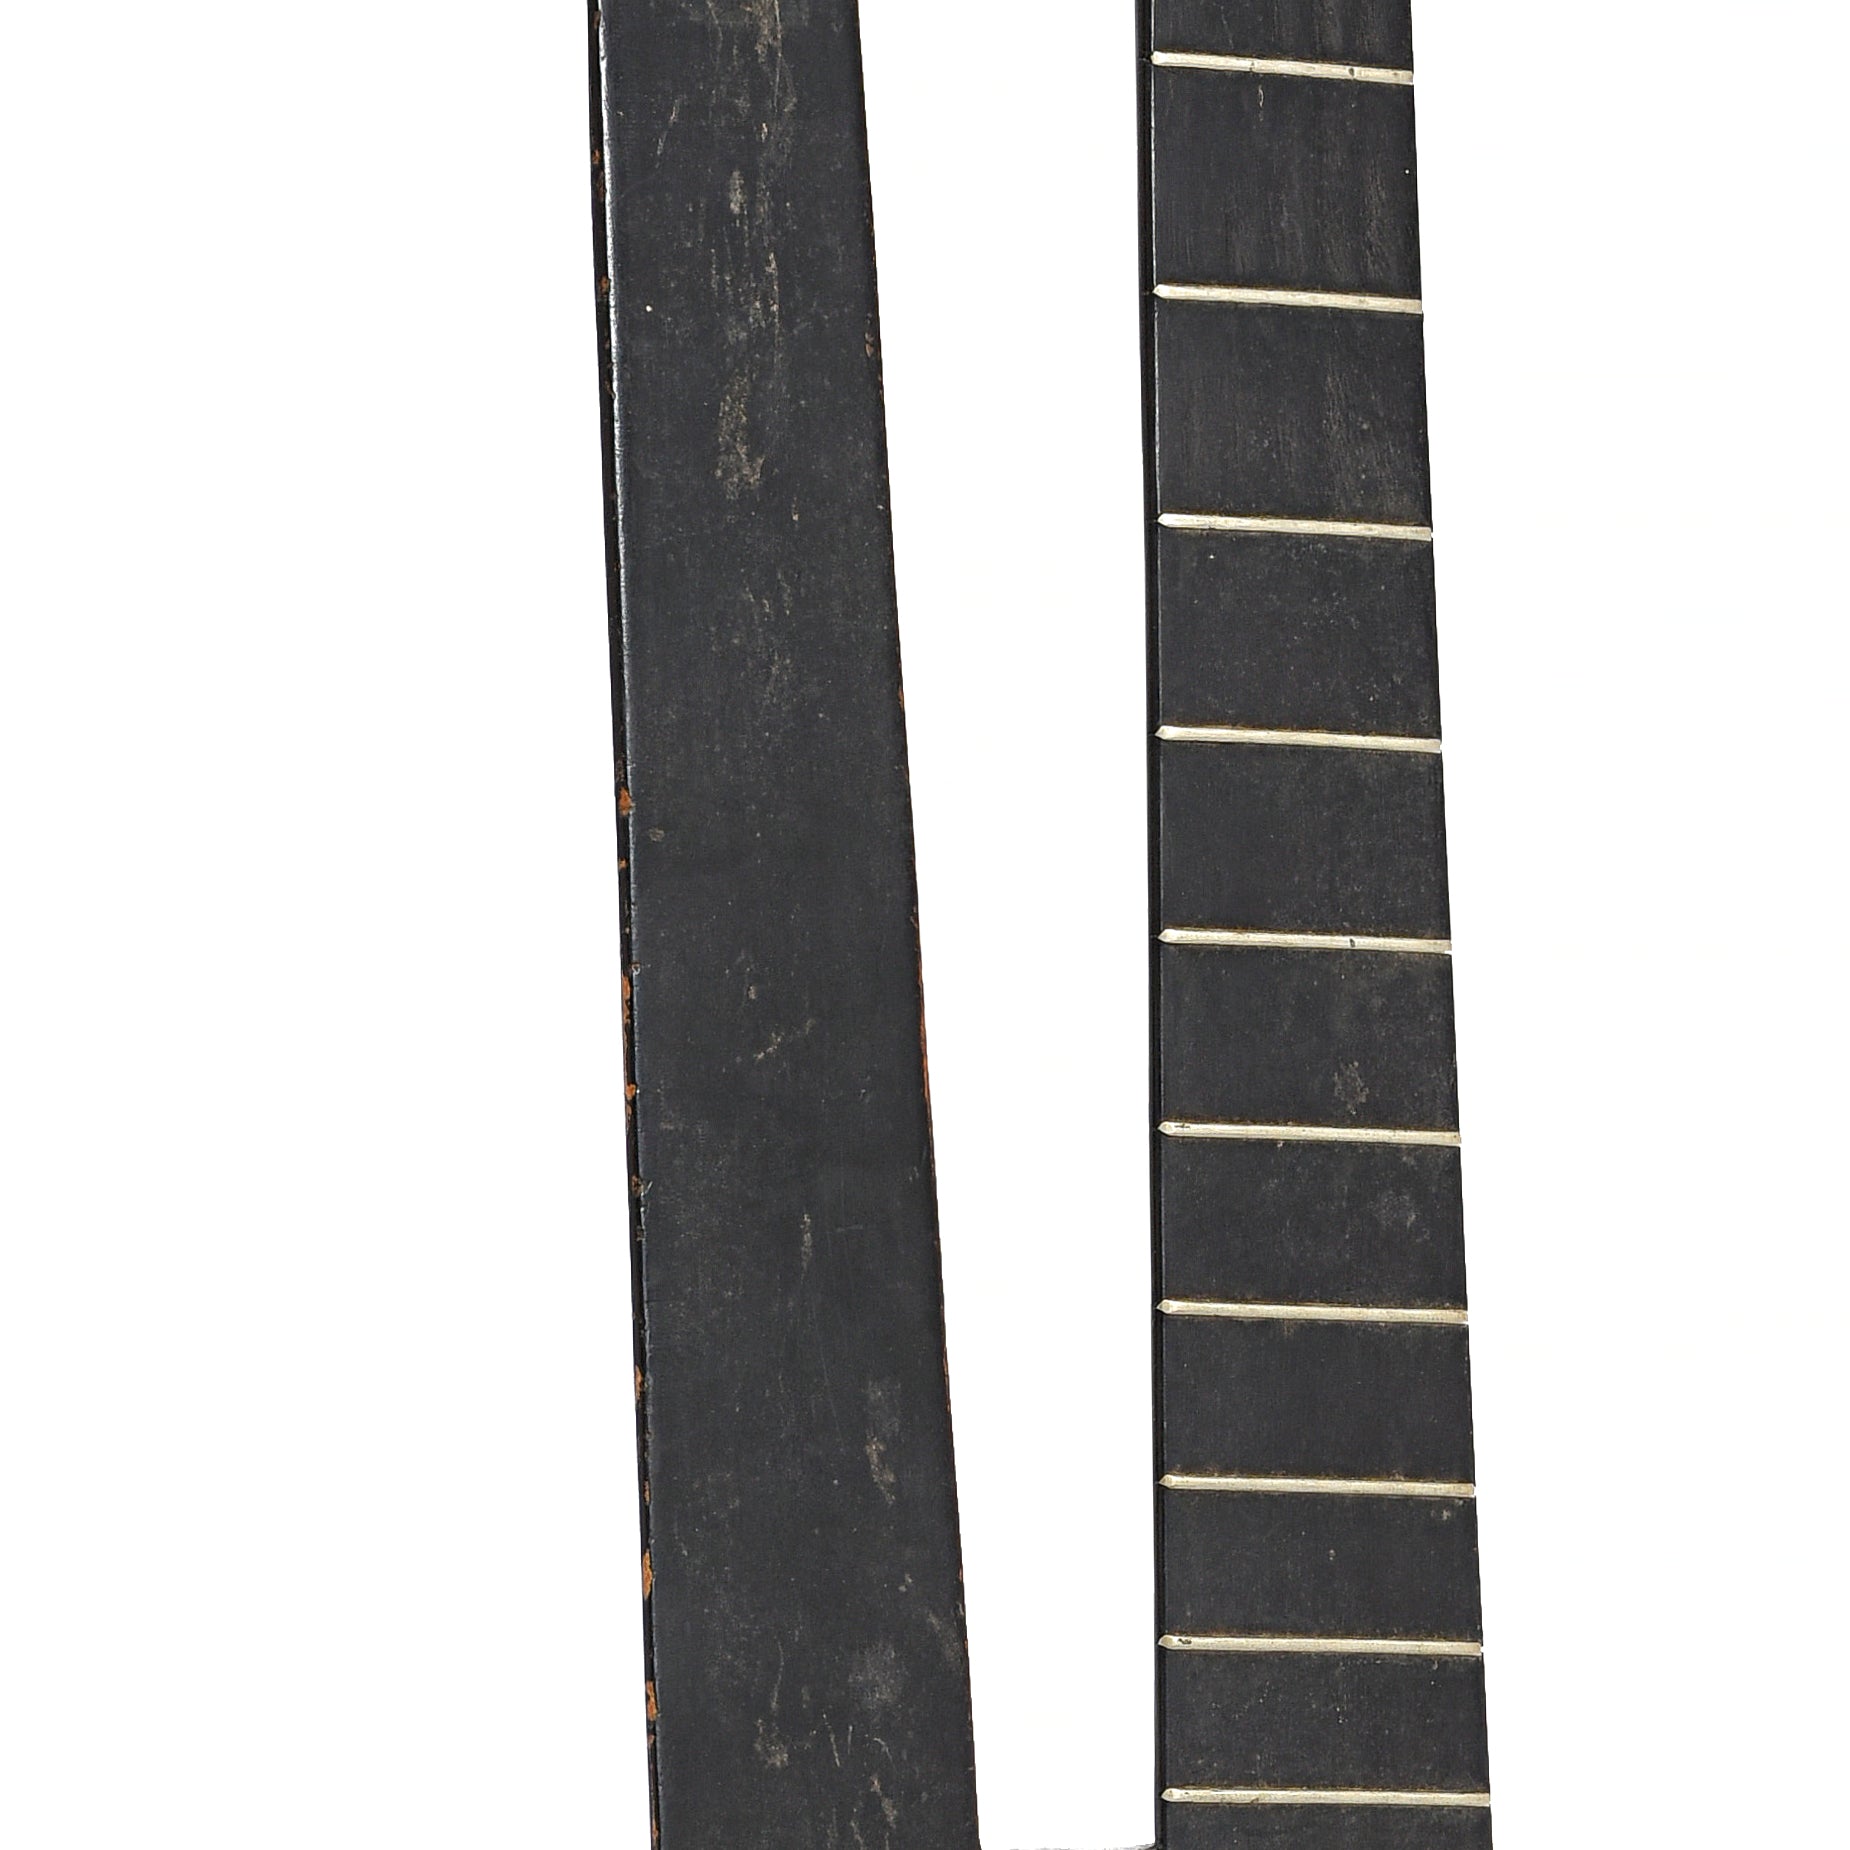 Fretboard of Unknown Maker Vienna Style Contra Guitar (1870s?)